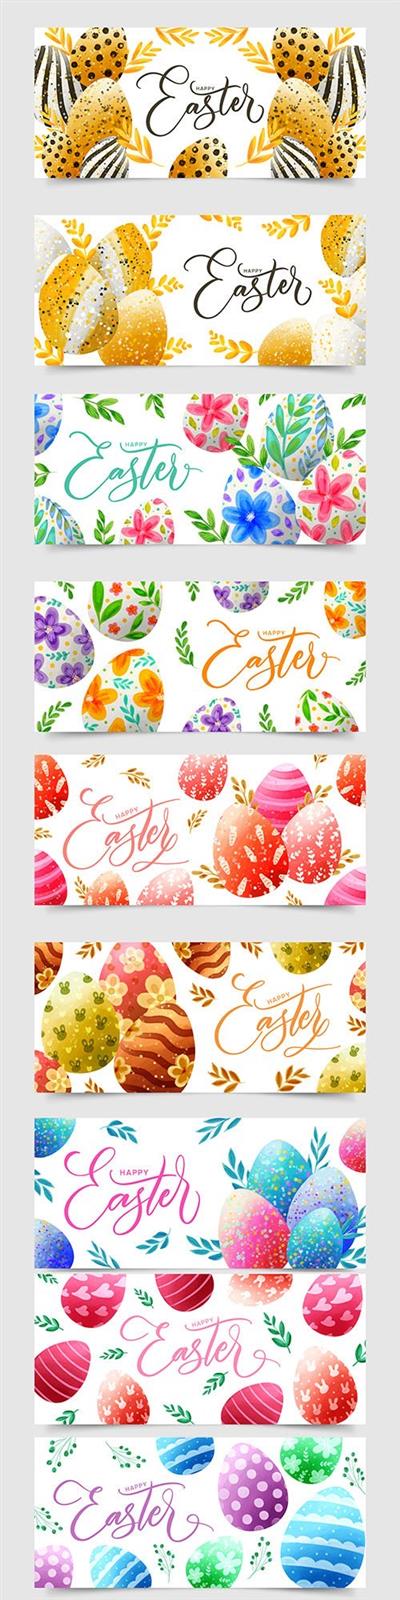 Easter eggs banners watercolor design illustrations